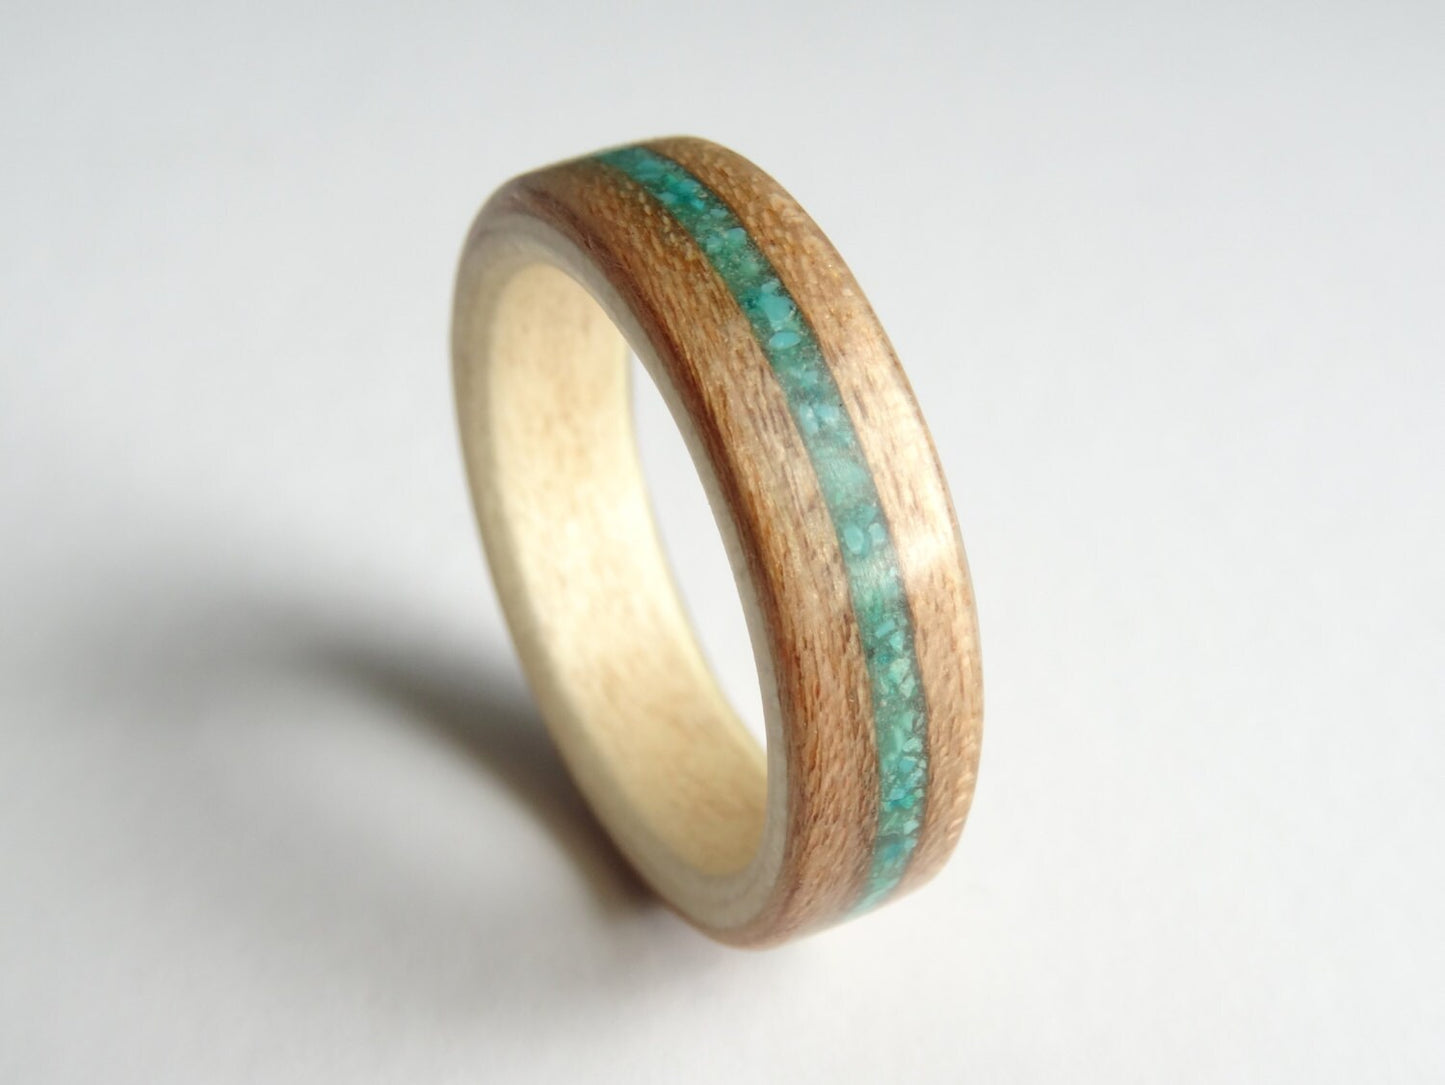 Cherry & Sycamore With Turquoise Bent Wood Ring